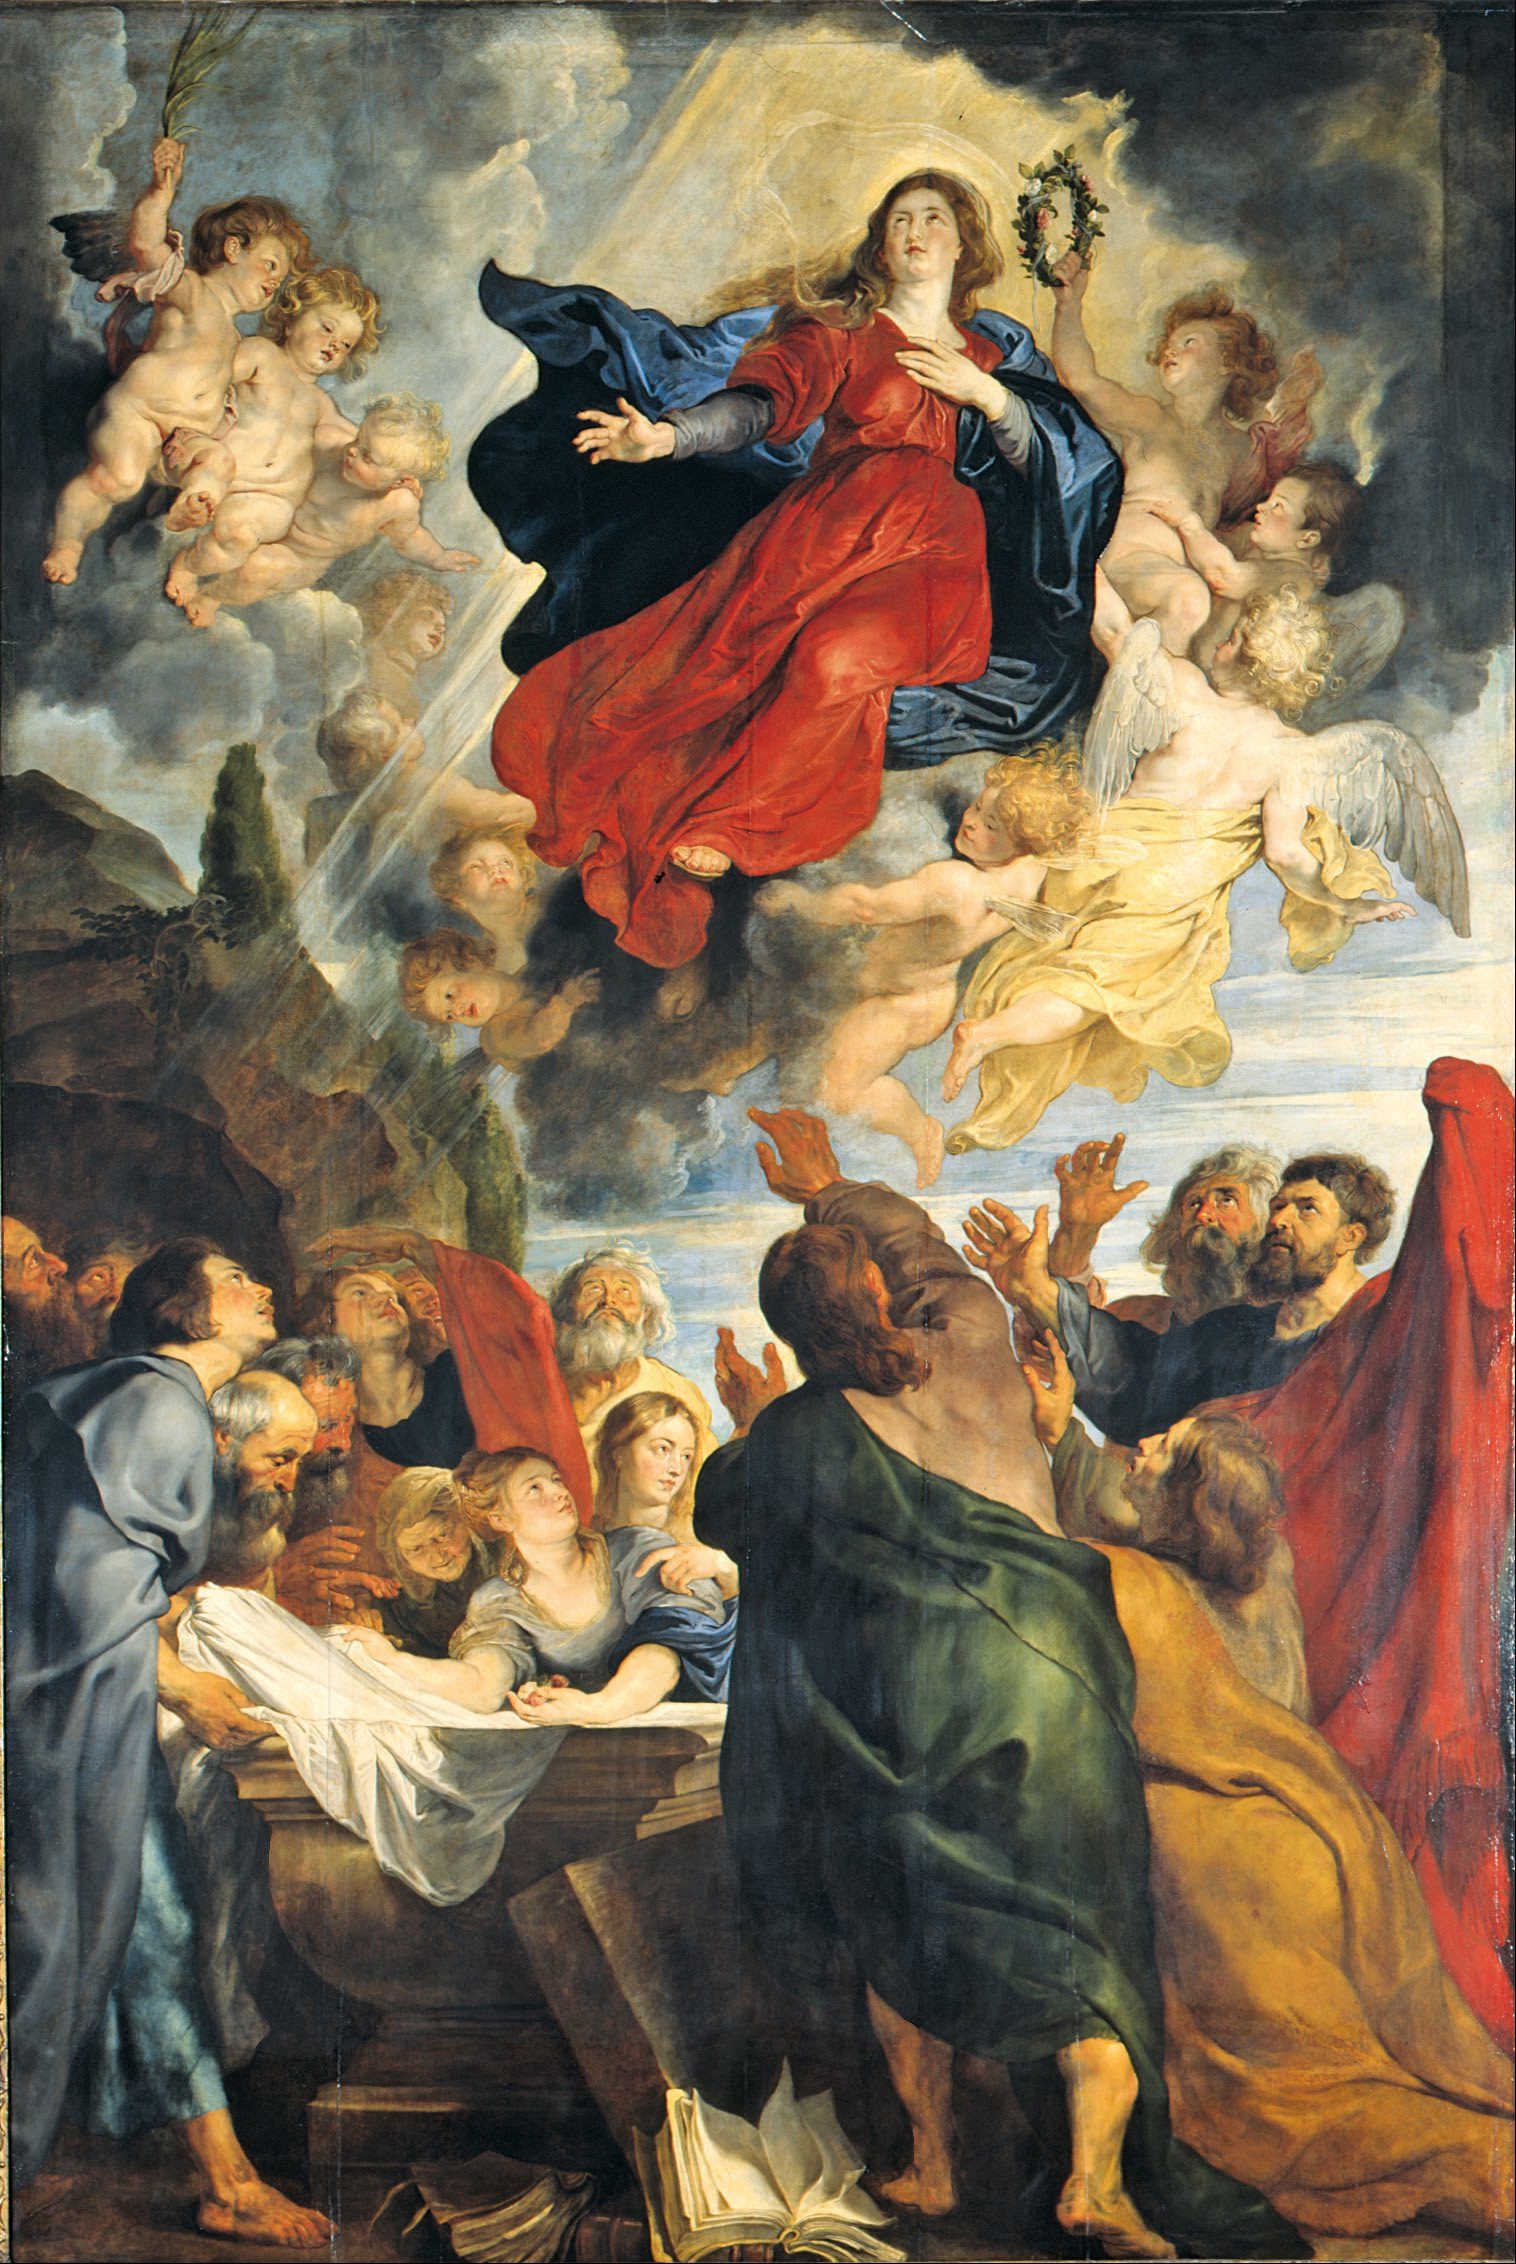 Assumption of the Virgin Mary